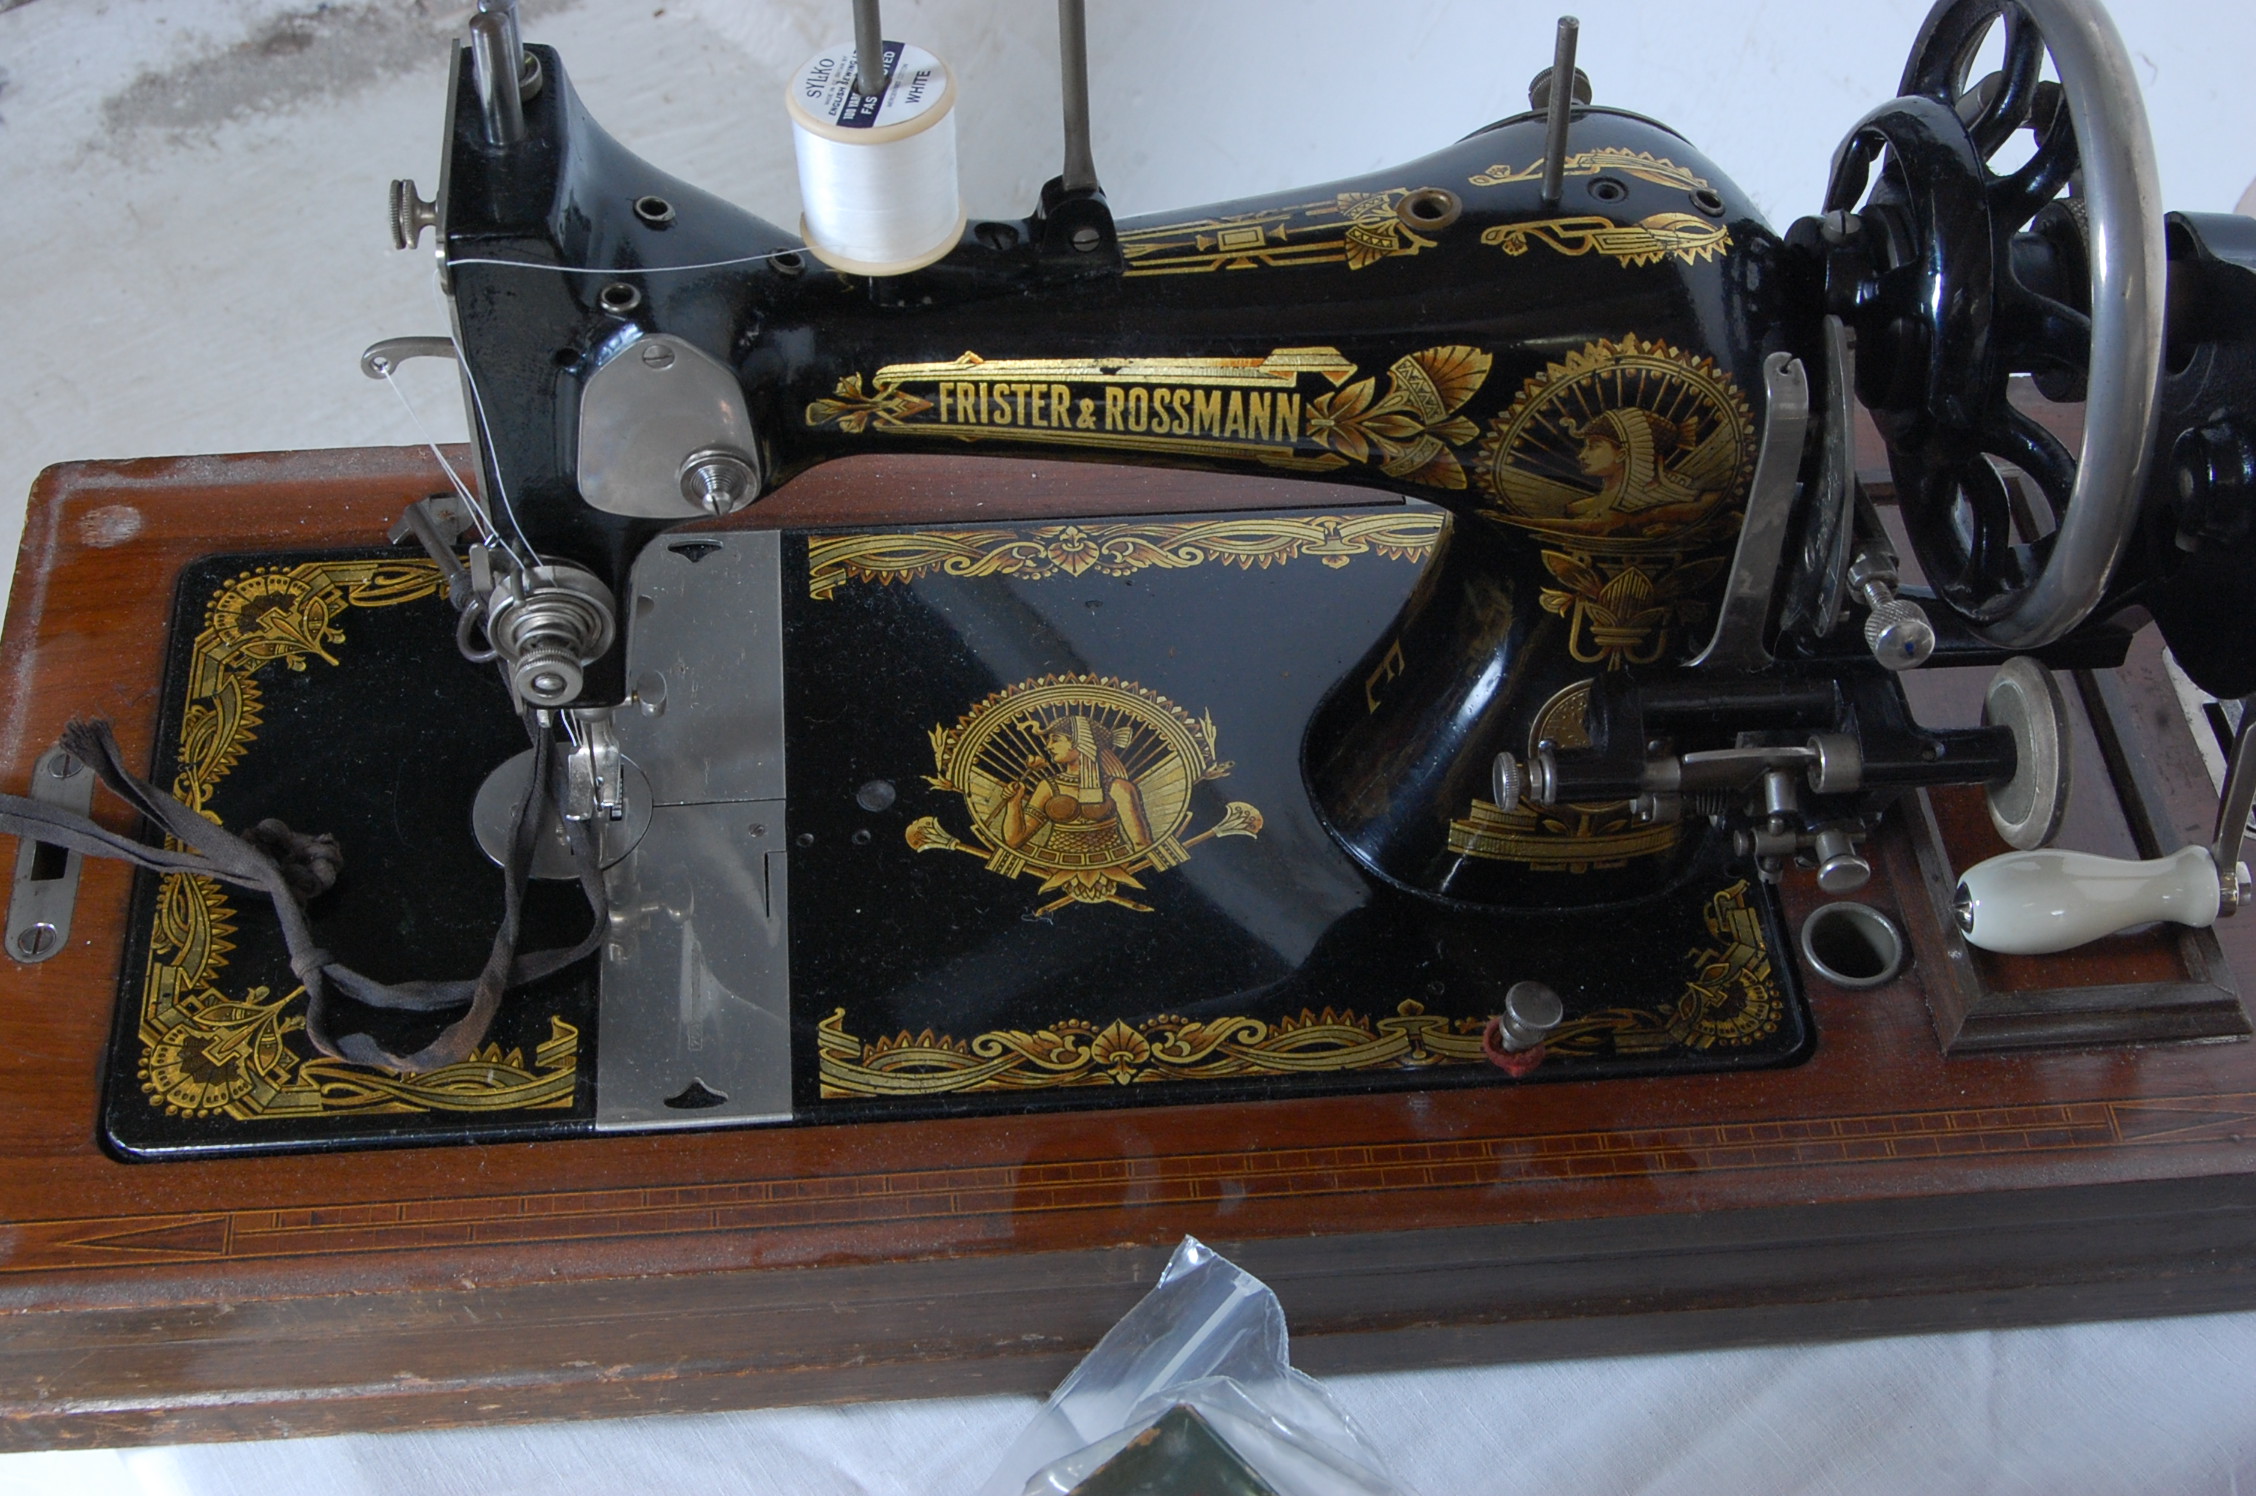 ANTIQUE EARLY 20TH CENTURY 1908 SINGER SEWING MACHINE - Image 4 of 7